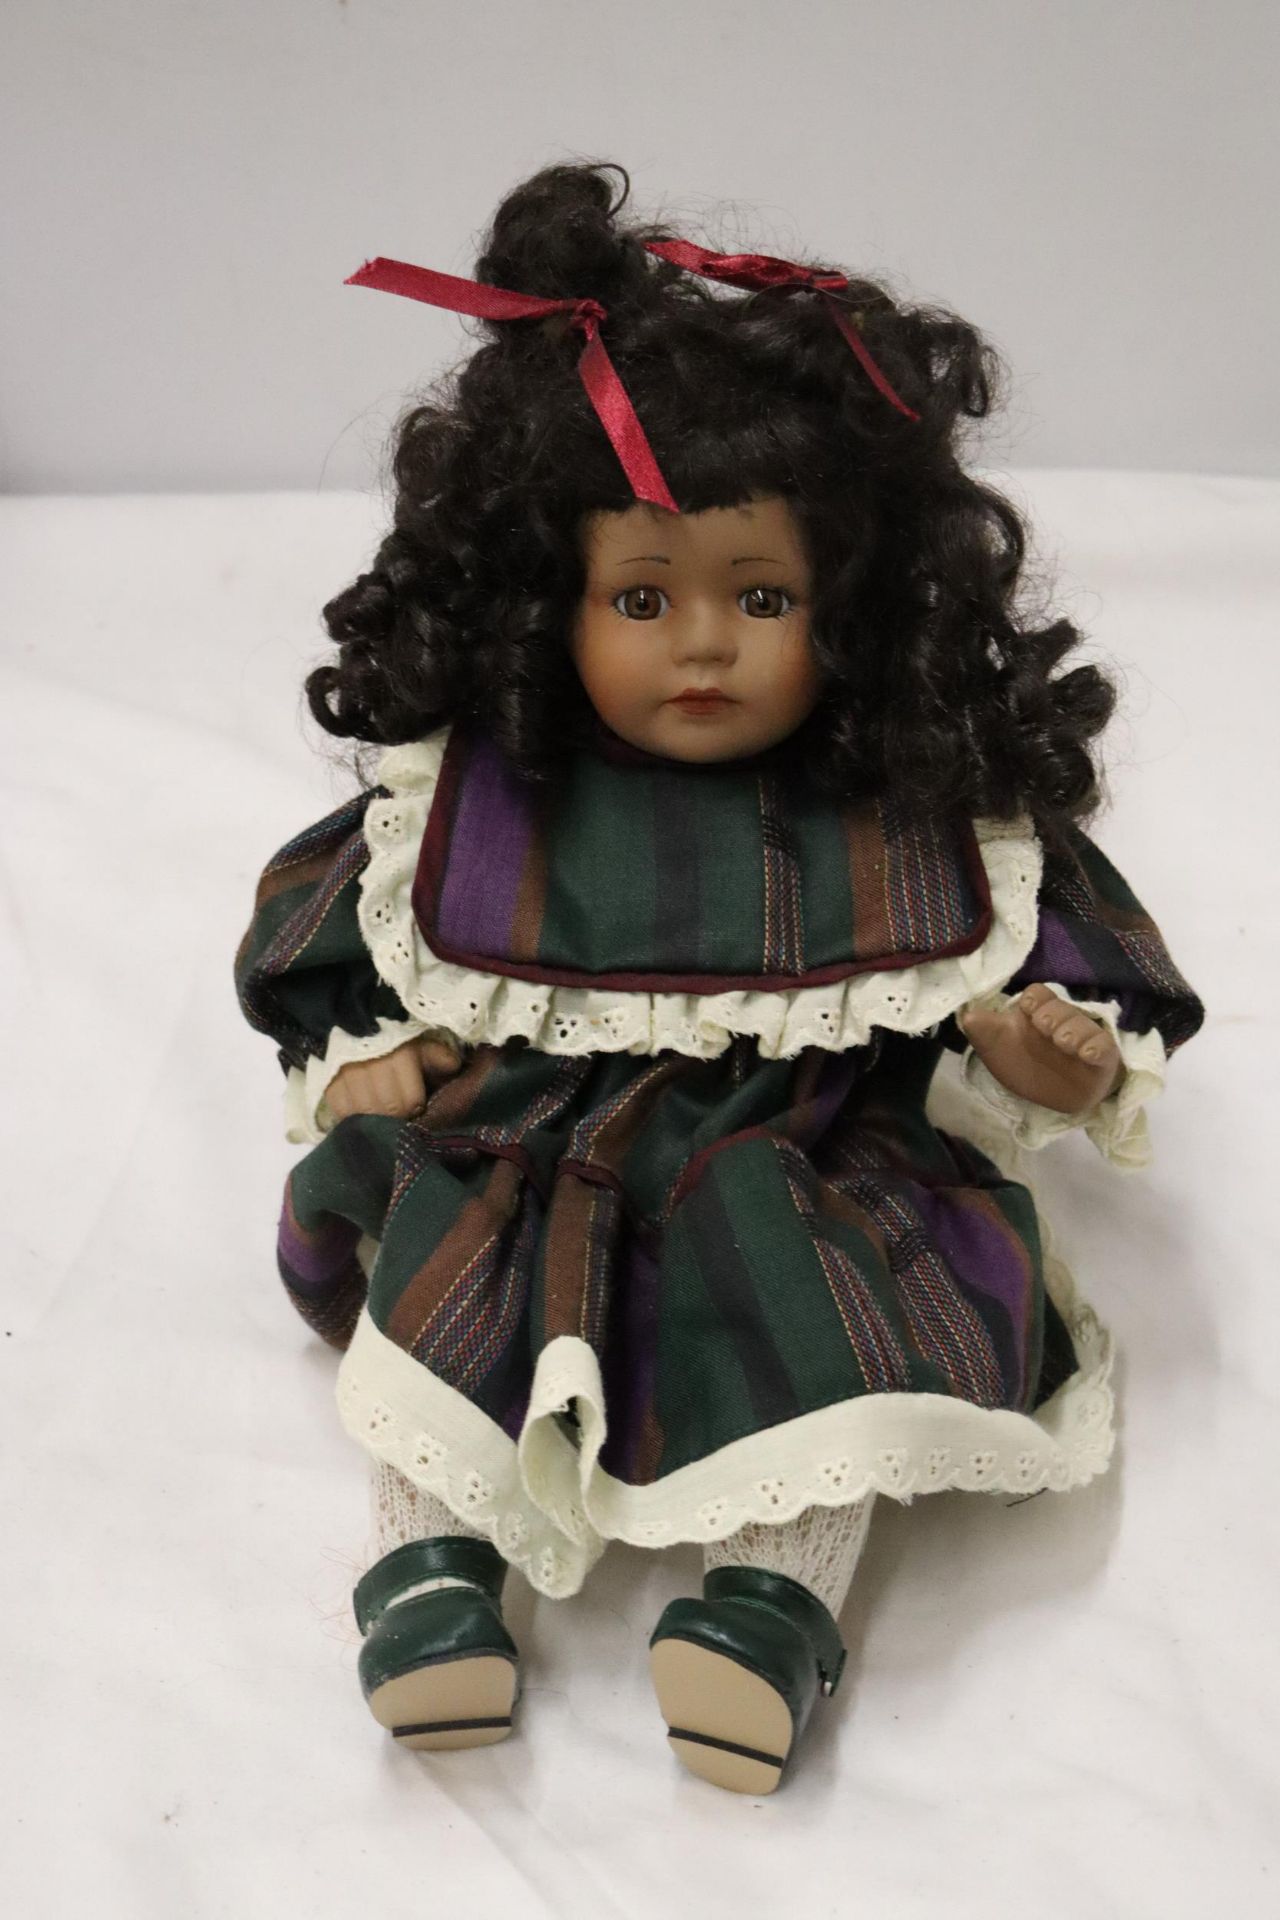 A VINTAGE CHINA DOLL IN SEATED POSE